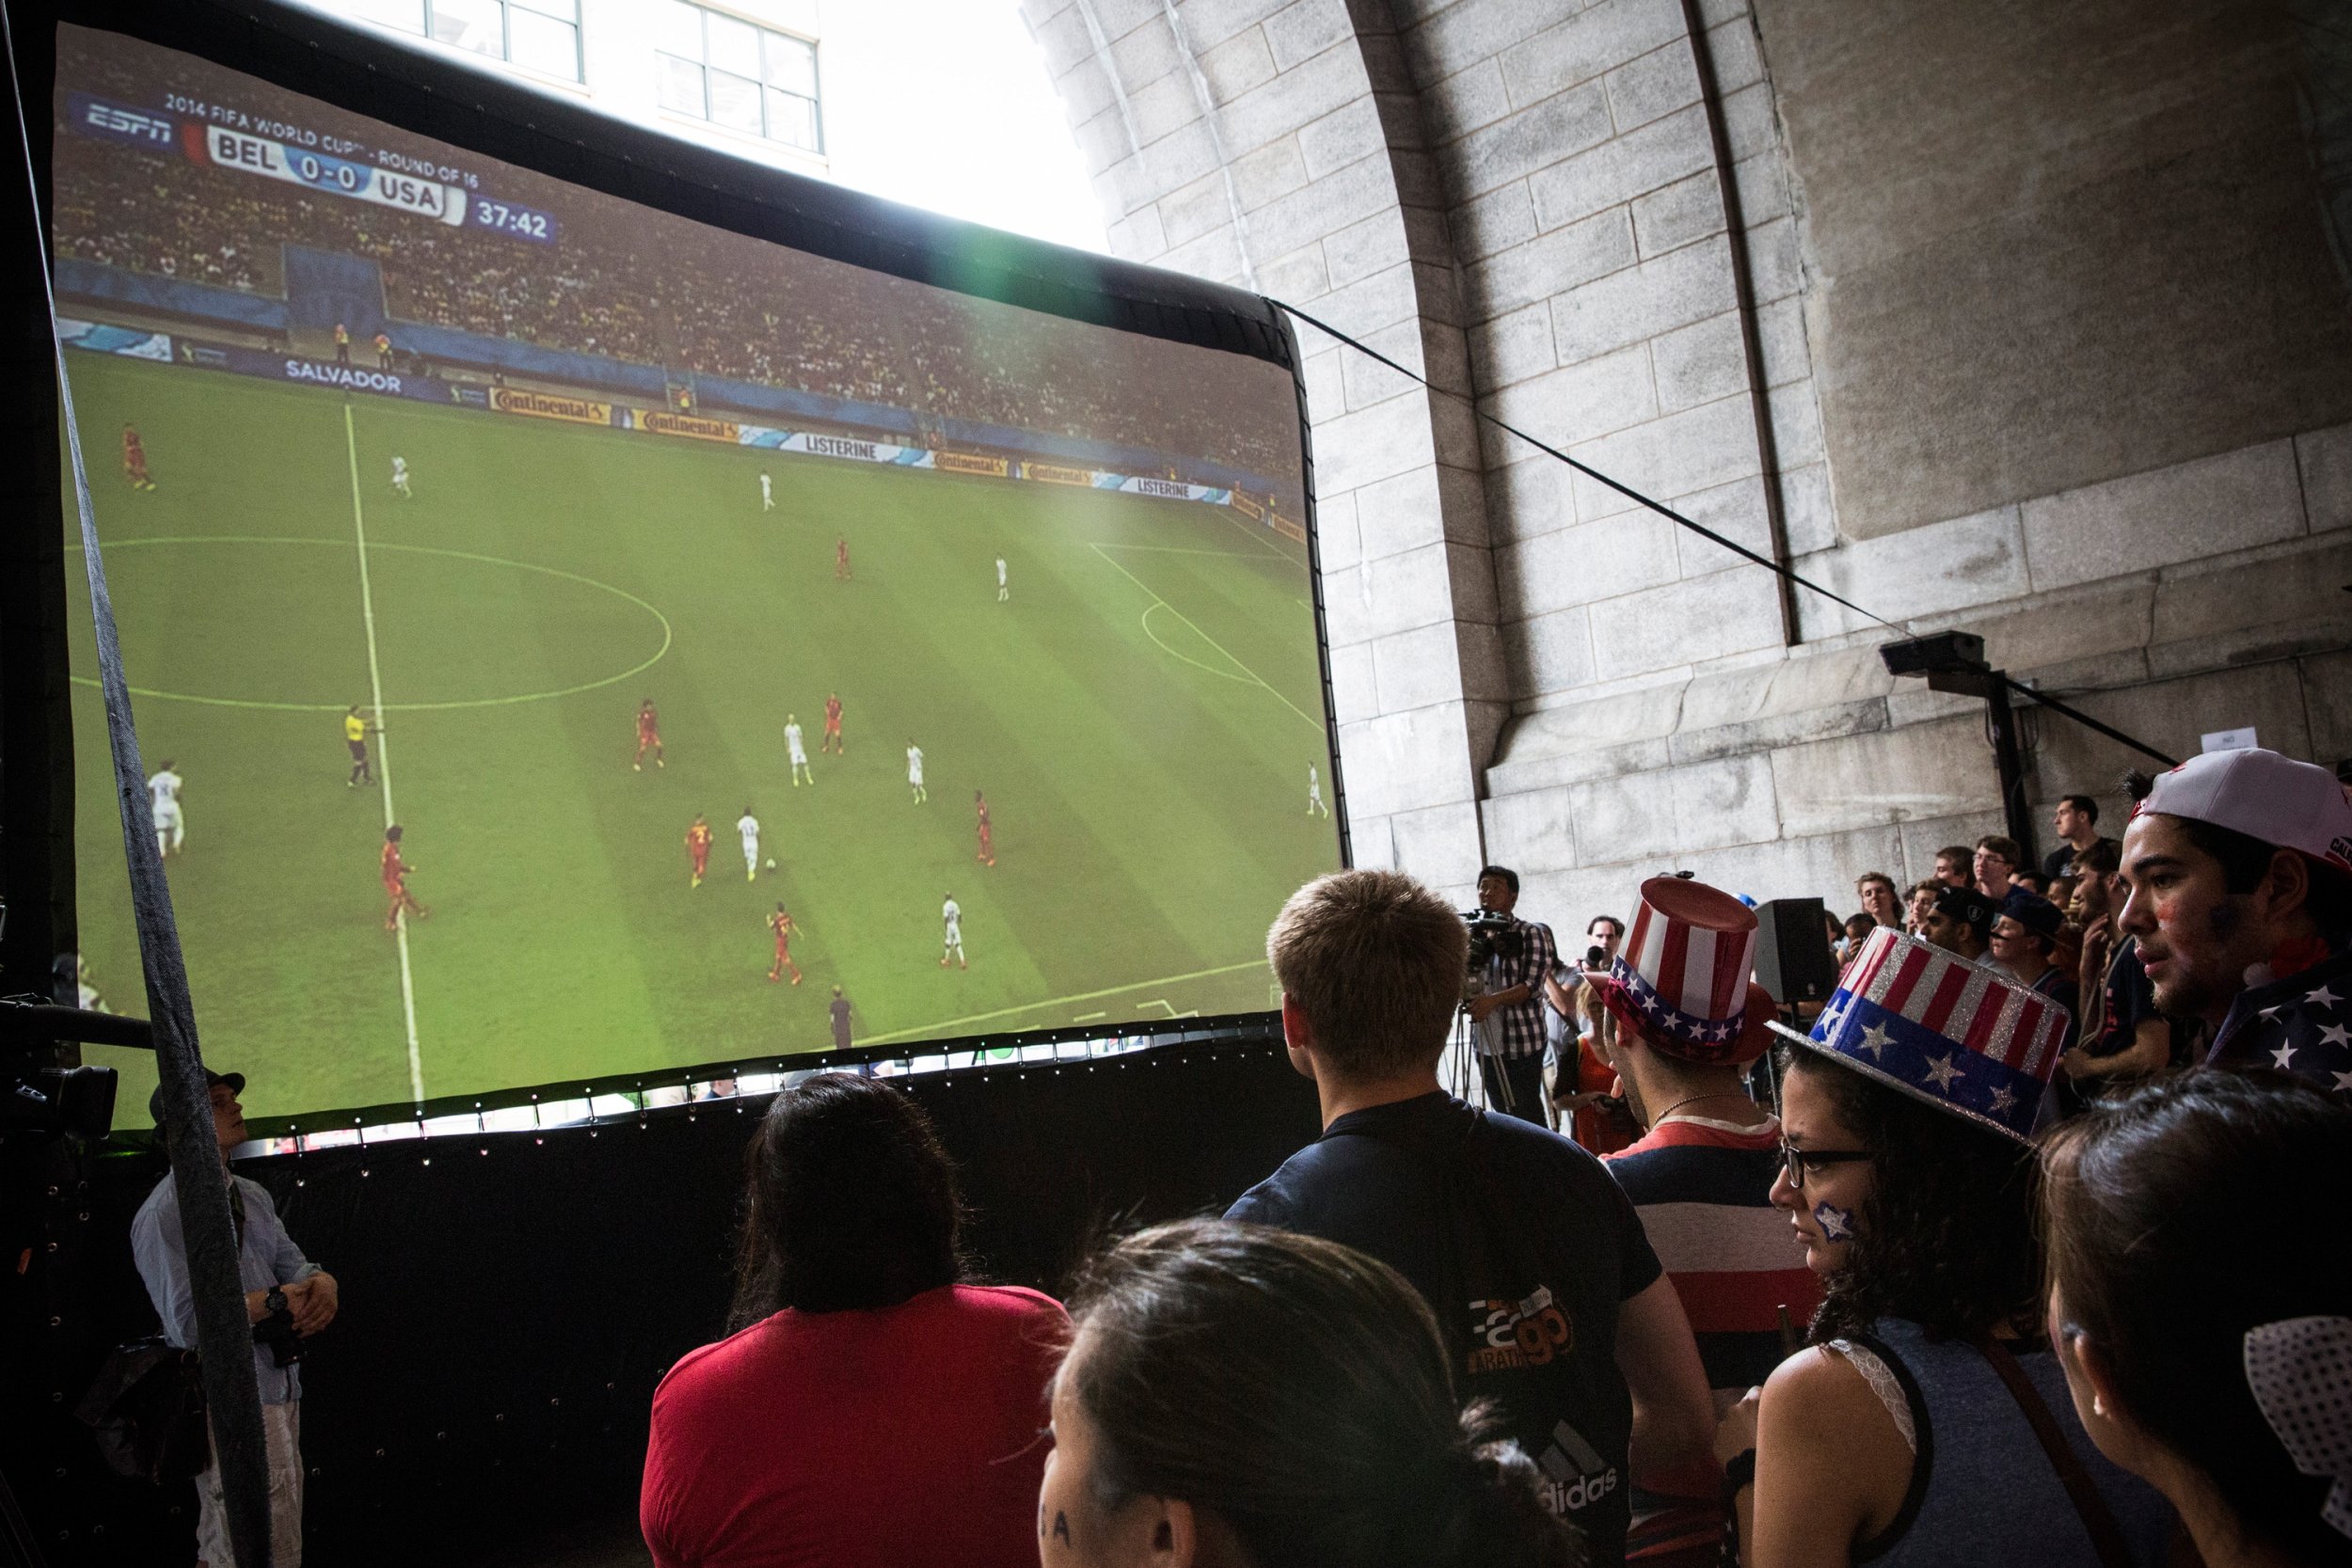 World Cup 2014 Live Stream As Free Univision Video Shuts Down, Piracy Expected To Rise